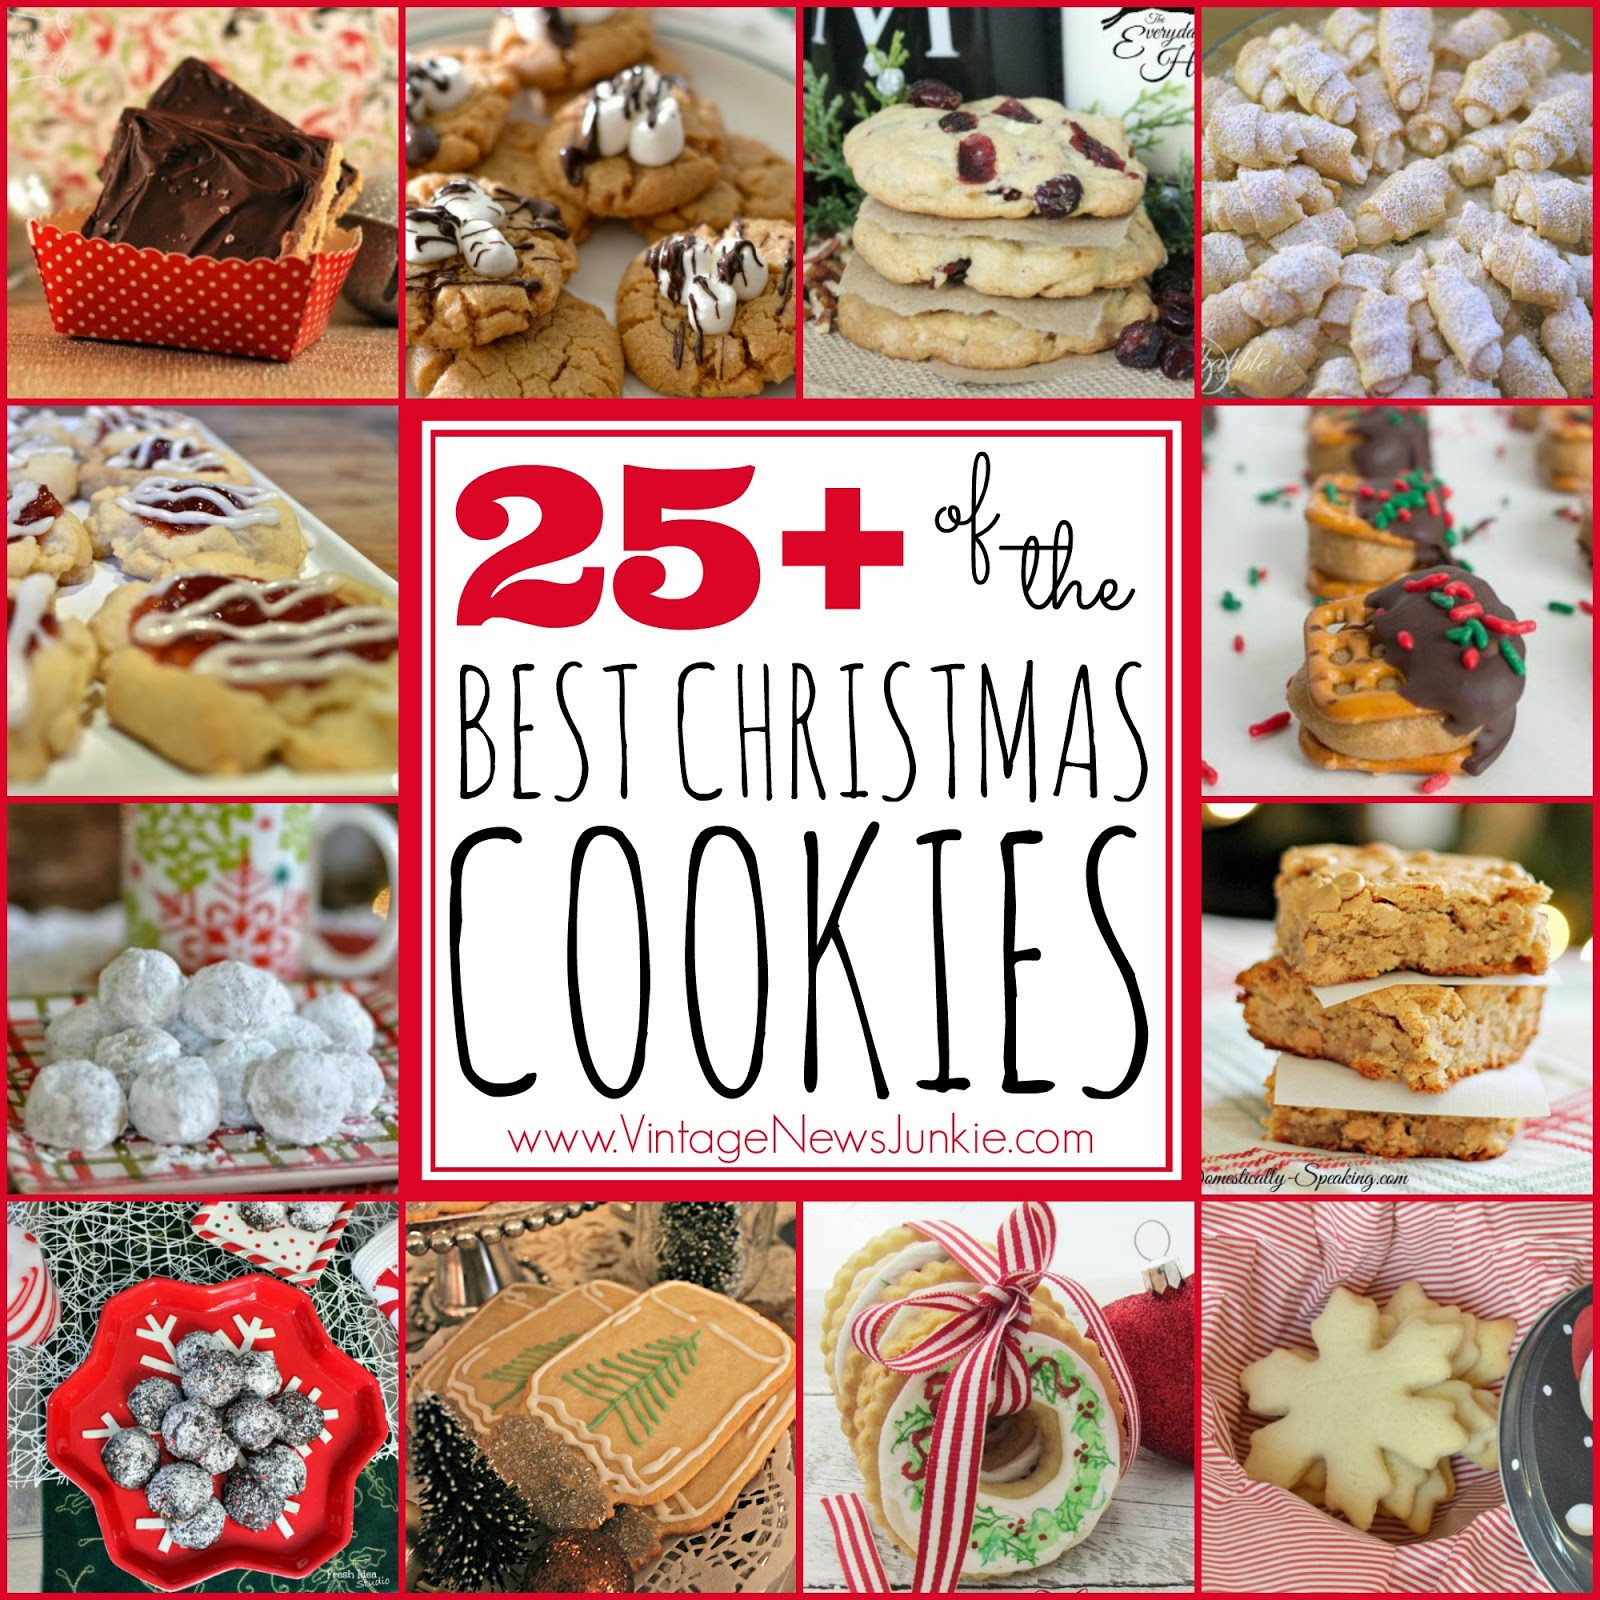 The Best Christmas Cookies Recipes With Pictures
 25 OF THE BEST CHRISTMAS COOKIE RECIPES Handy DIY